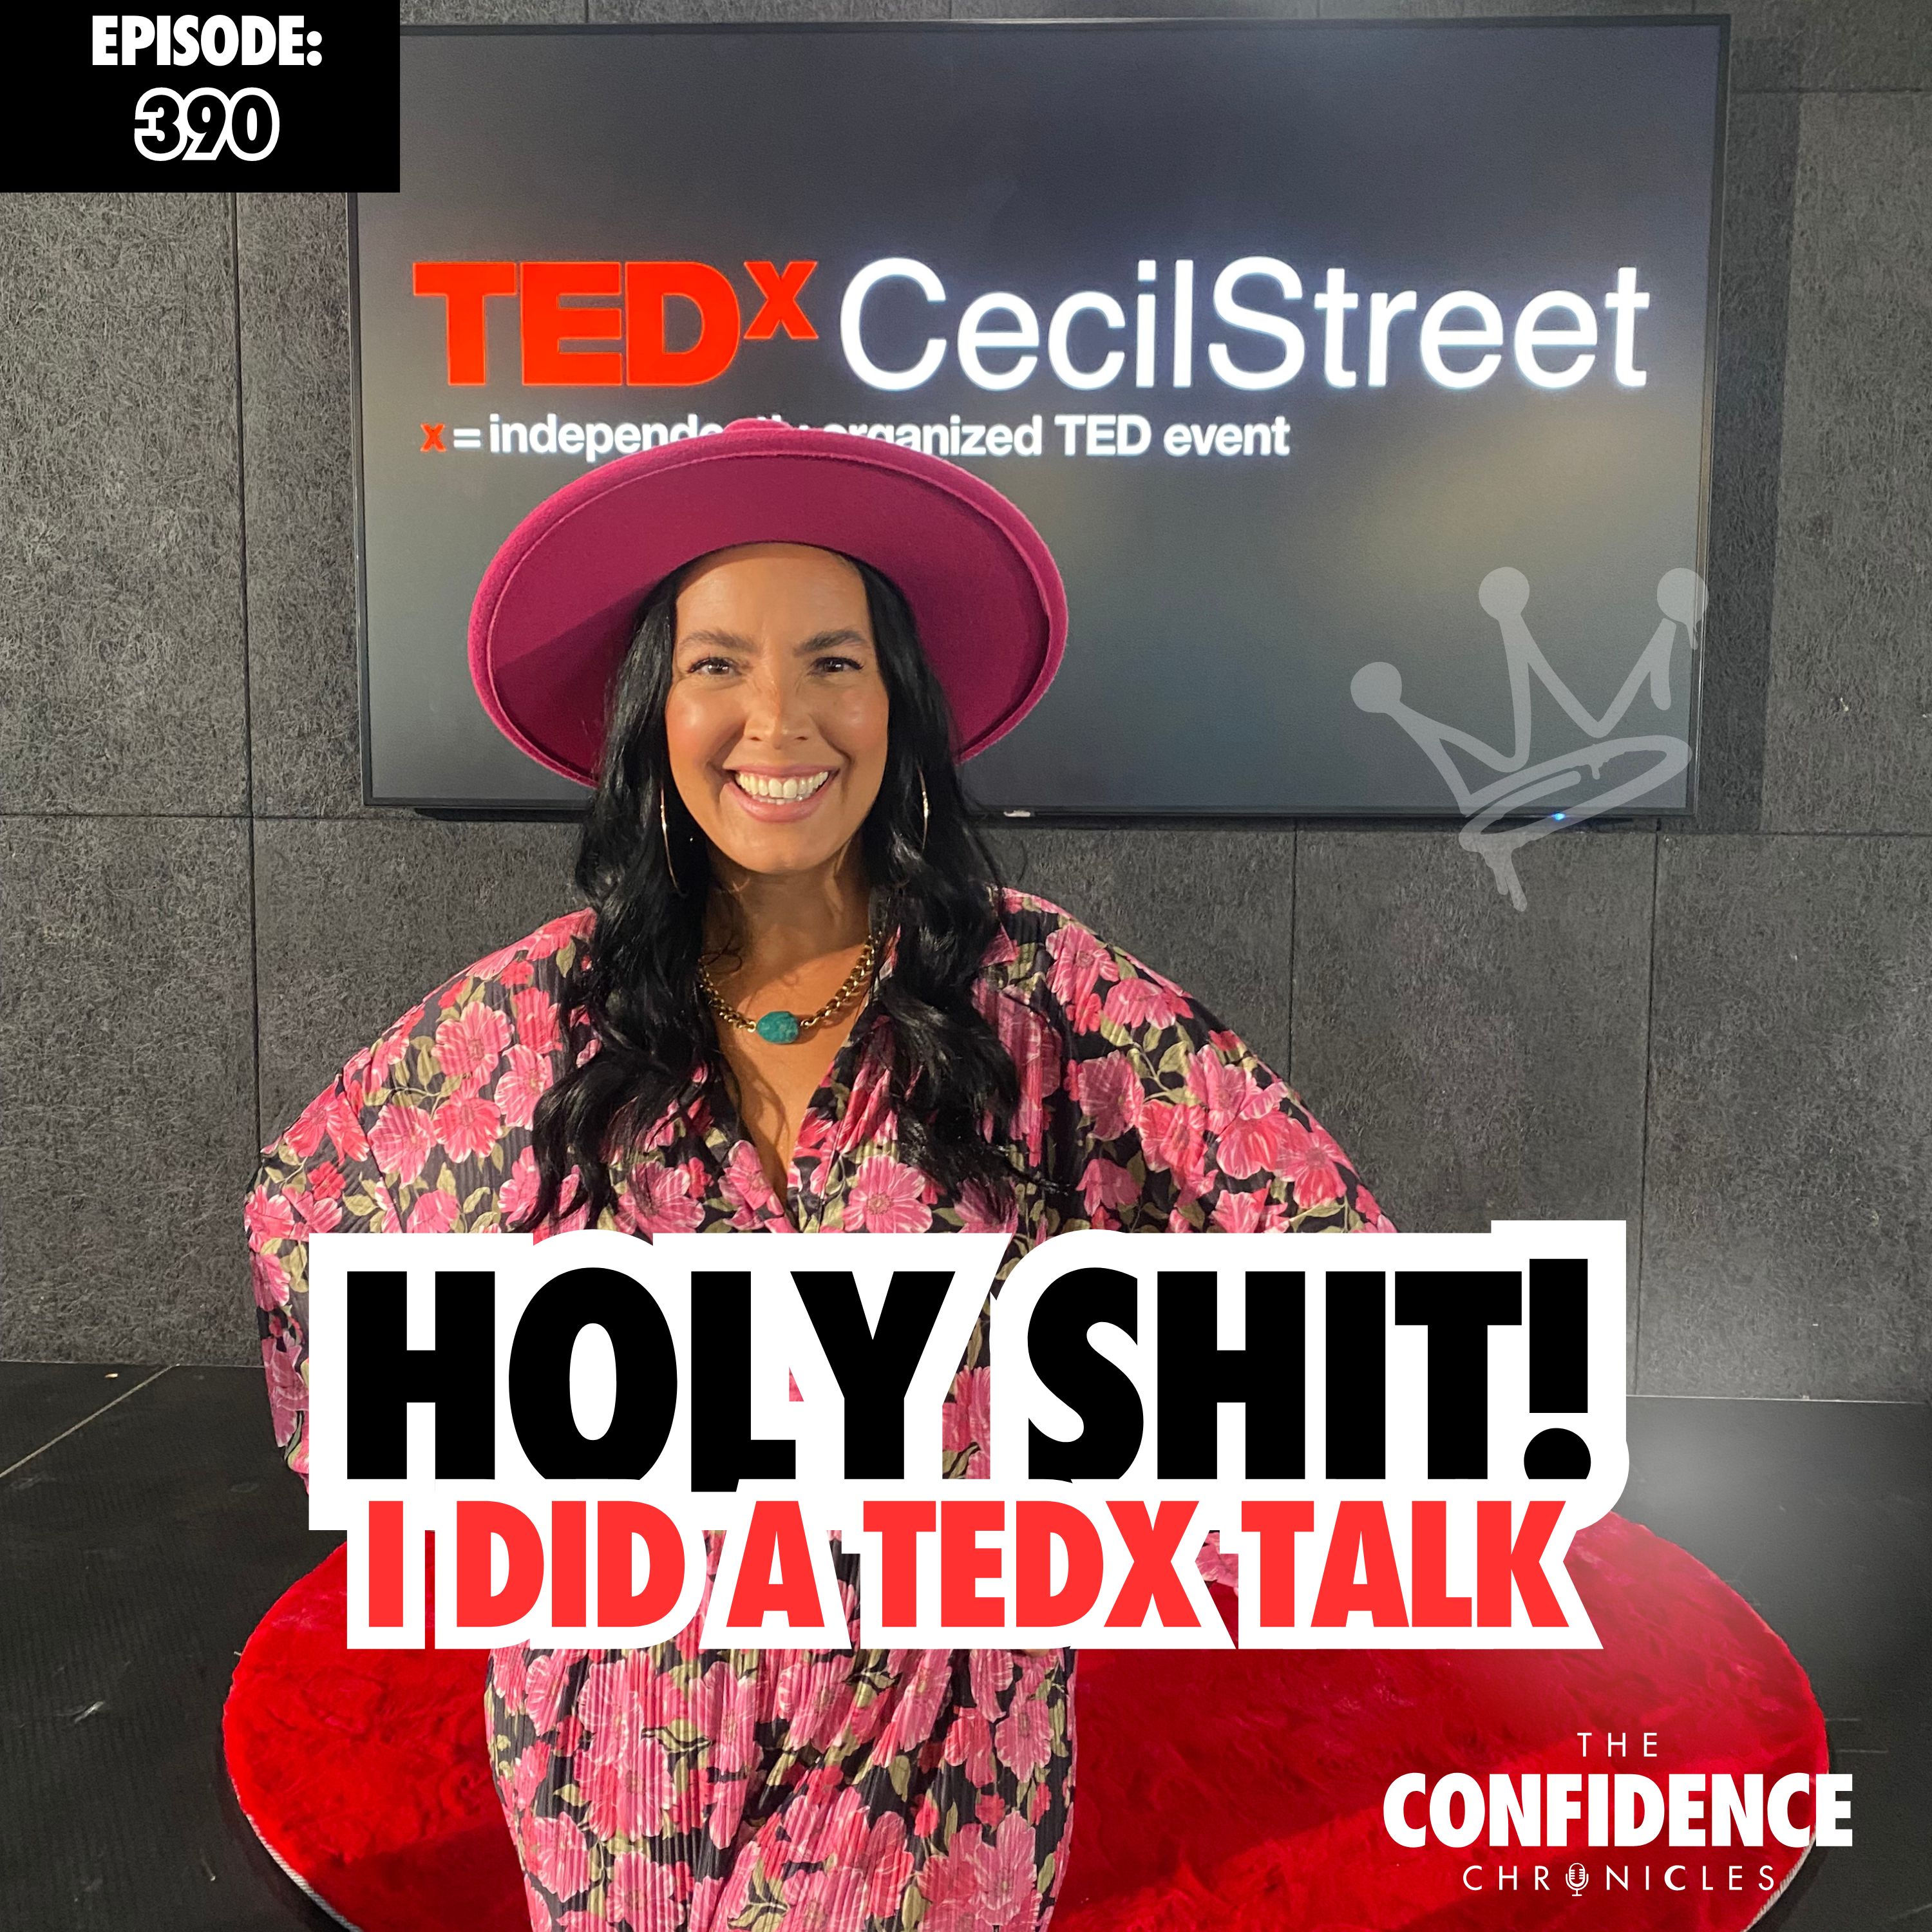 😱 Holy shit! I did a TEDX TALK!!!